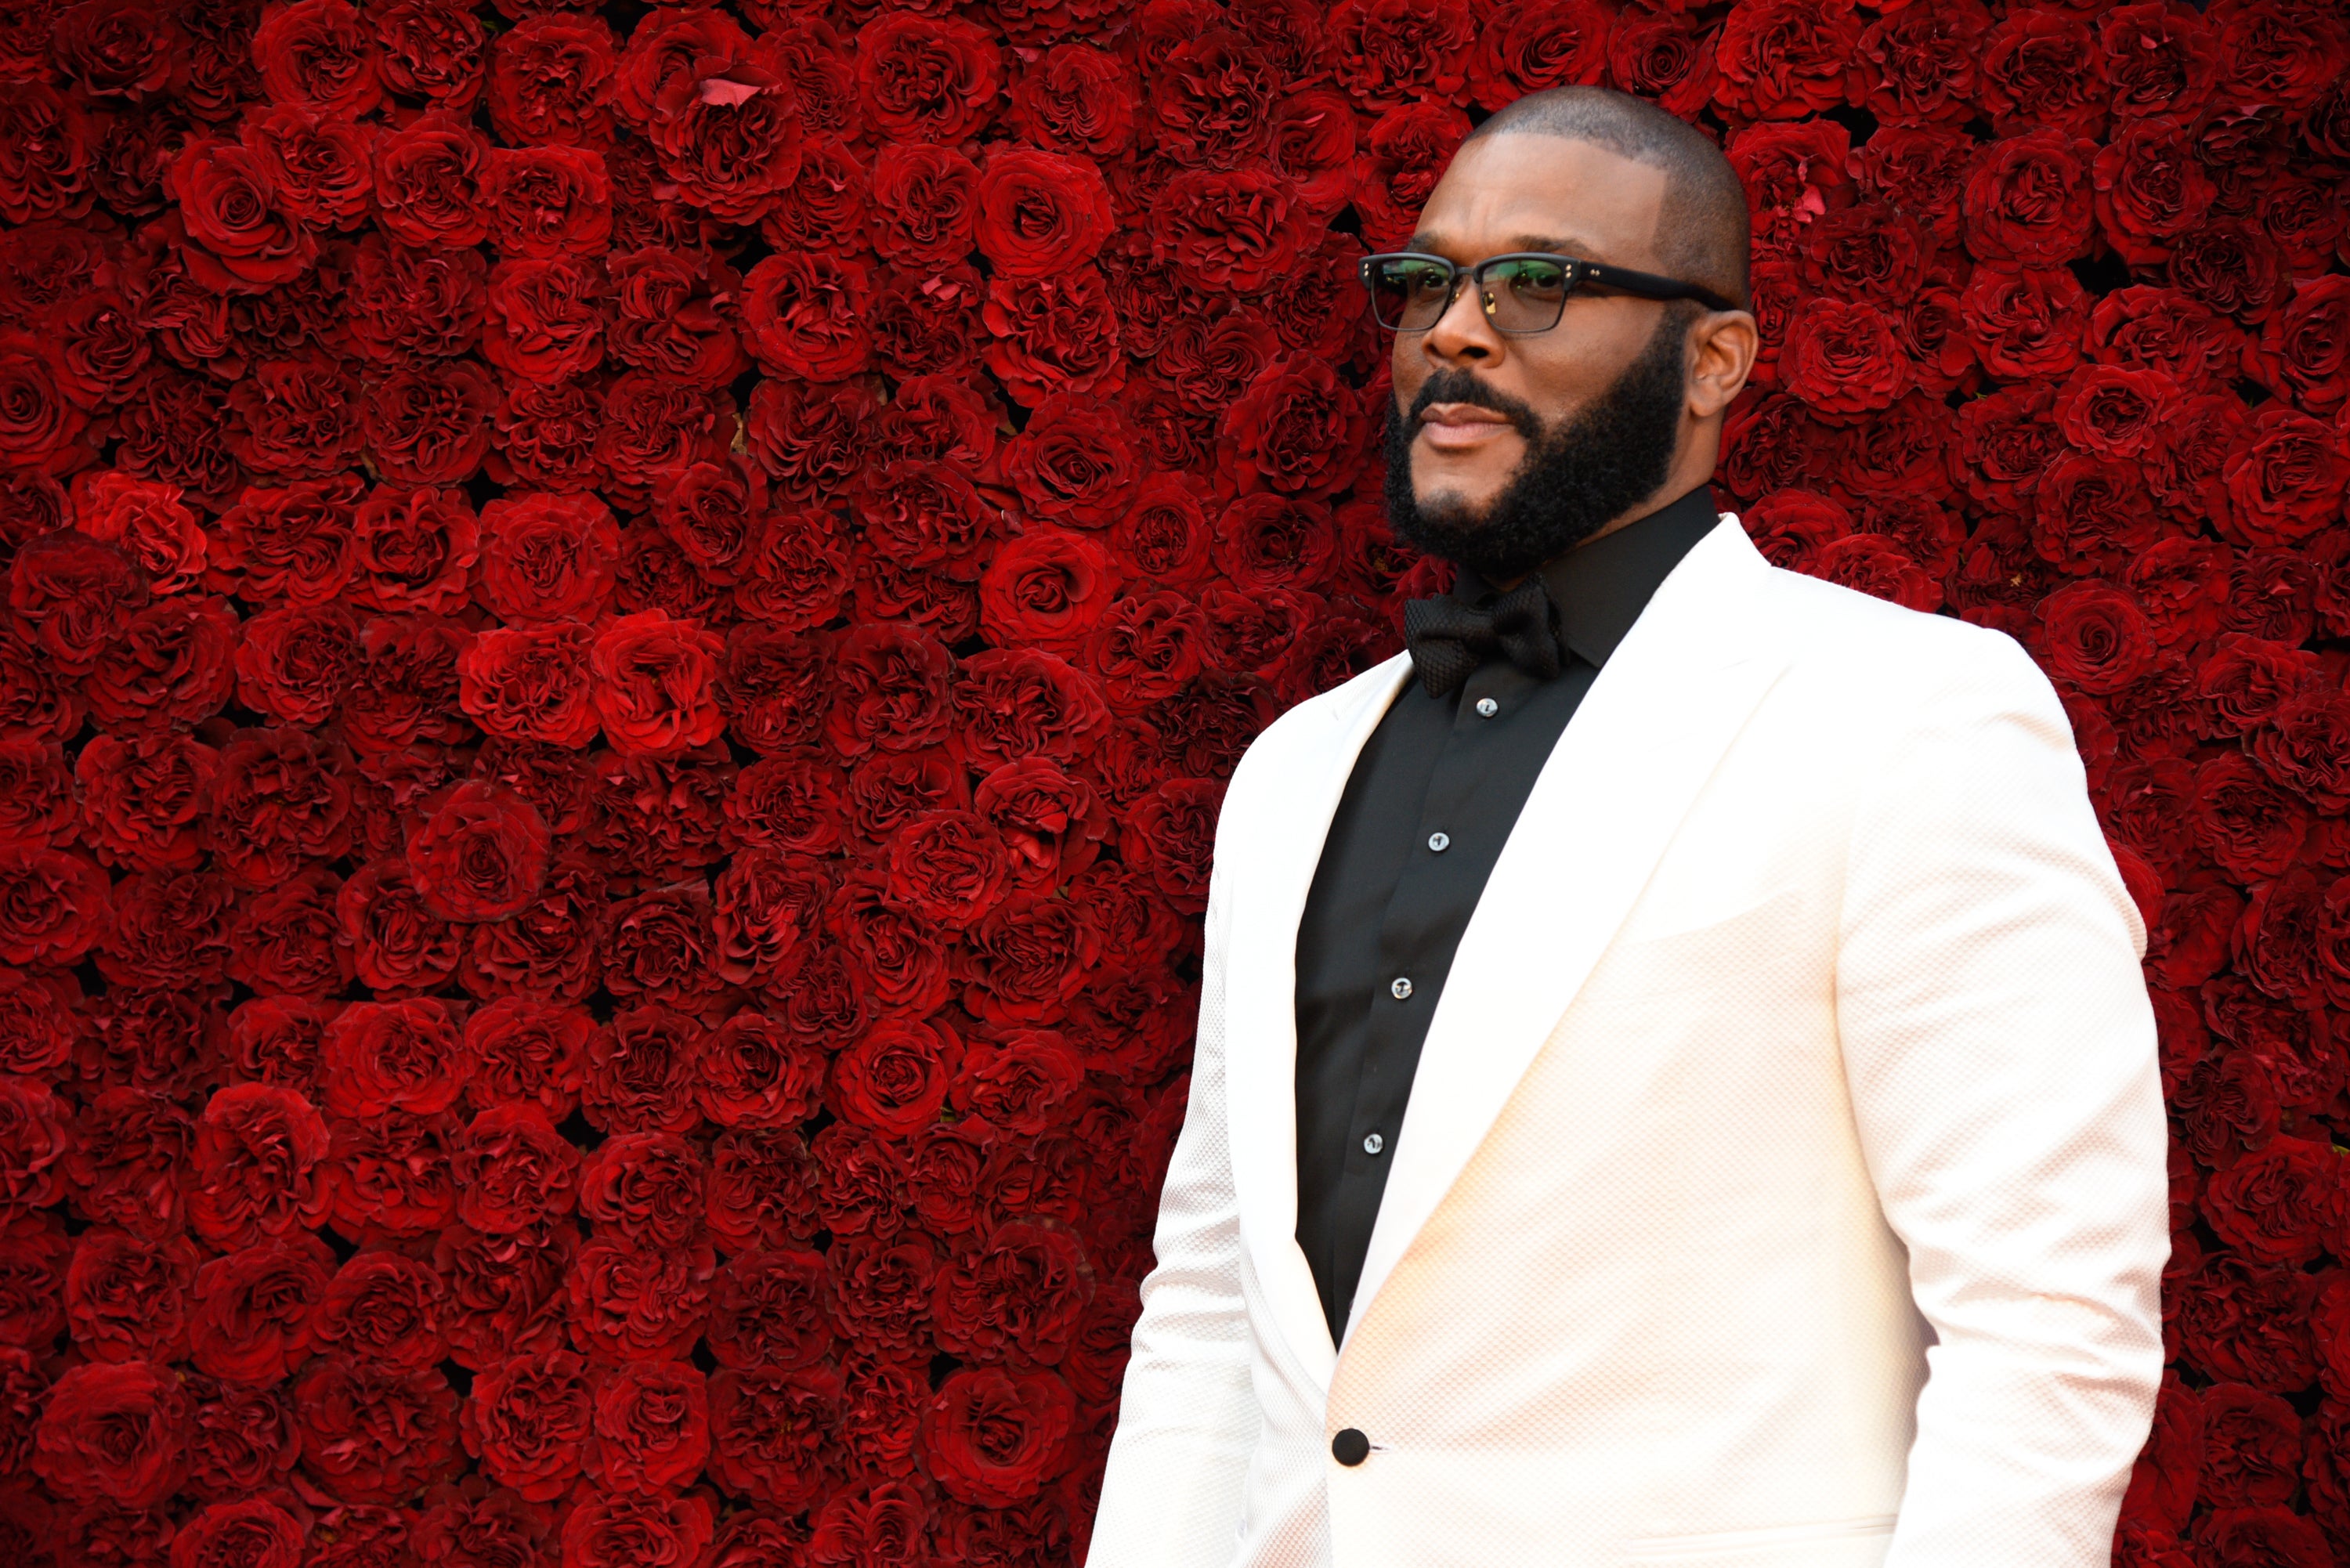 Celebrities Join Tyler Perry’s New Challenge To Inspire Others Amid Coronavirus Outbreak